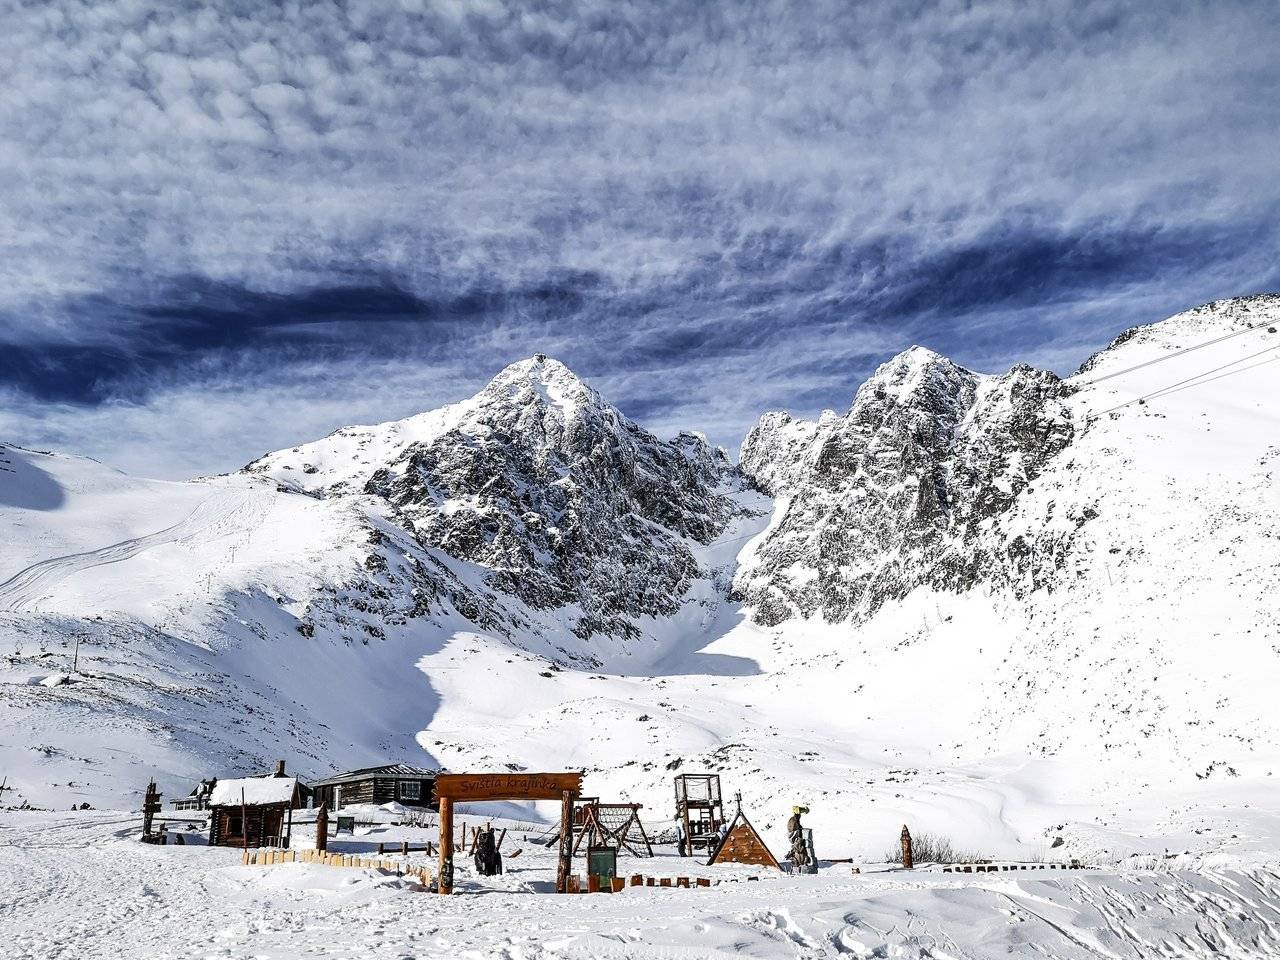   Skalnate Pleso could only be accessed by cable car as the route leading to Skalnate Pleso is closed down for skiing. Photo by Alis Monte [CC BY-SA 4.0], via Connecting the Dots